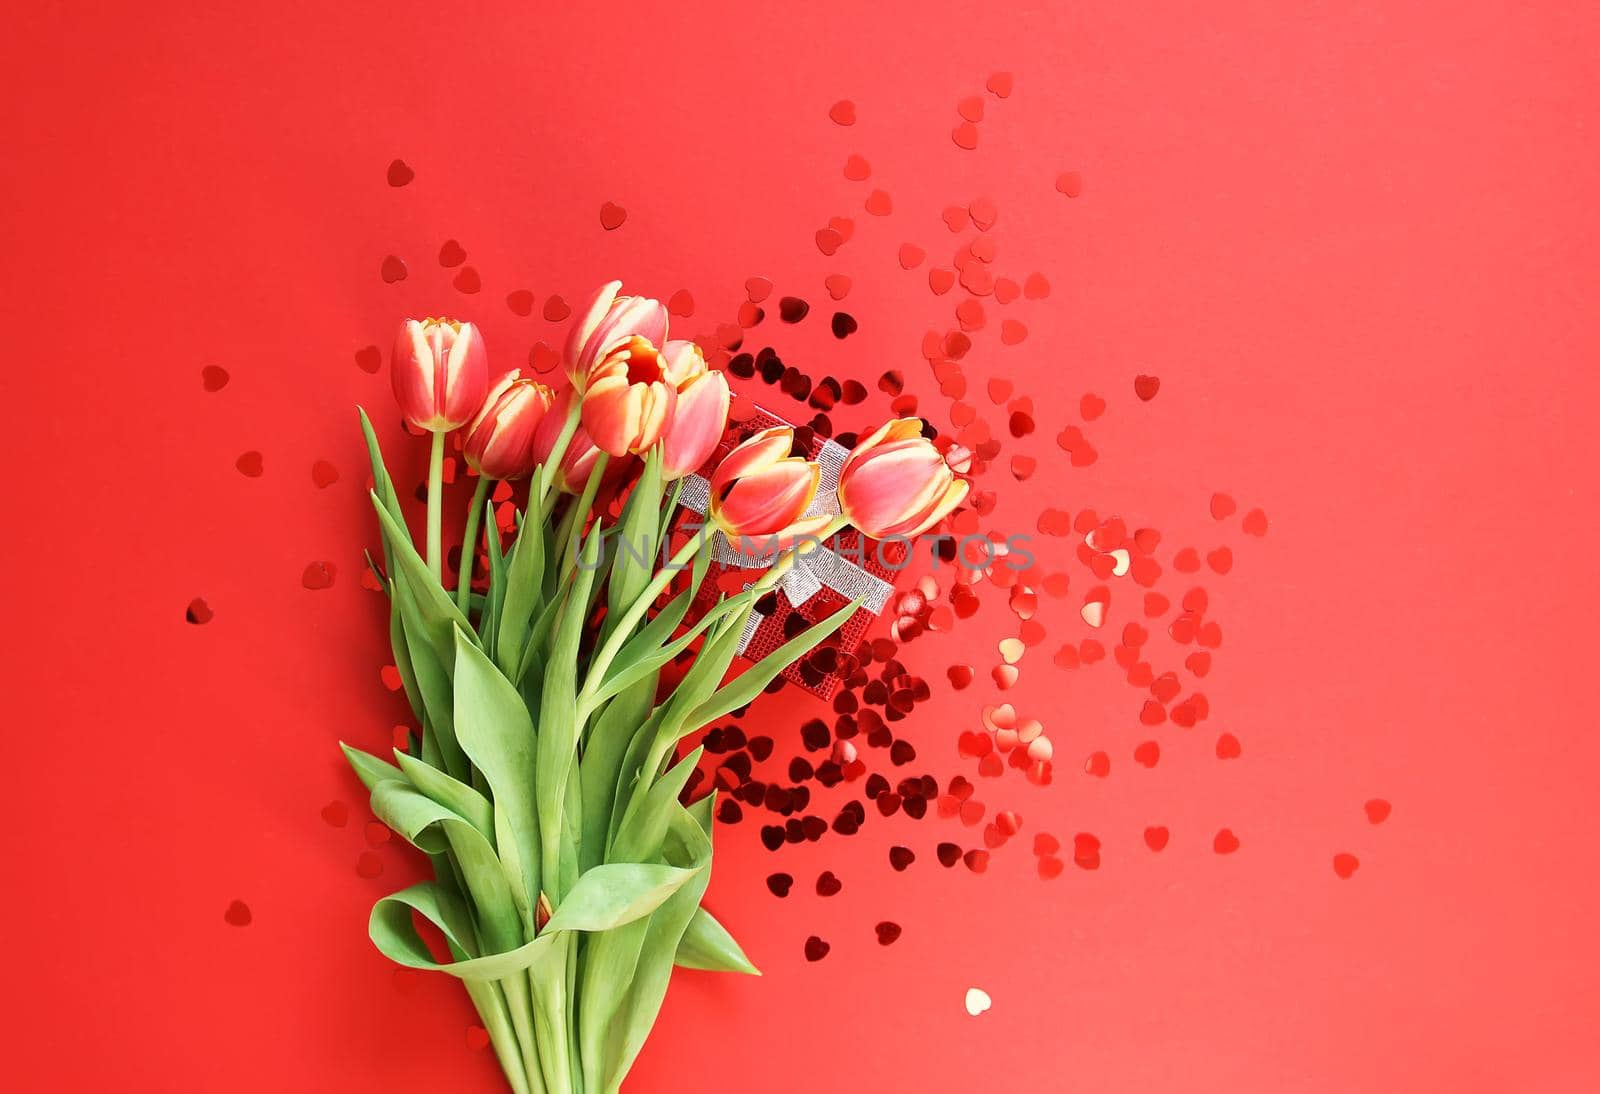 Spring beautiful tulip flowers on bright red background with heart tinsel. by nightlyviolet